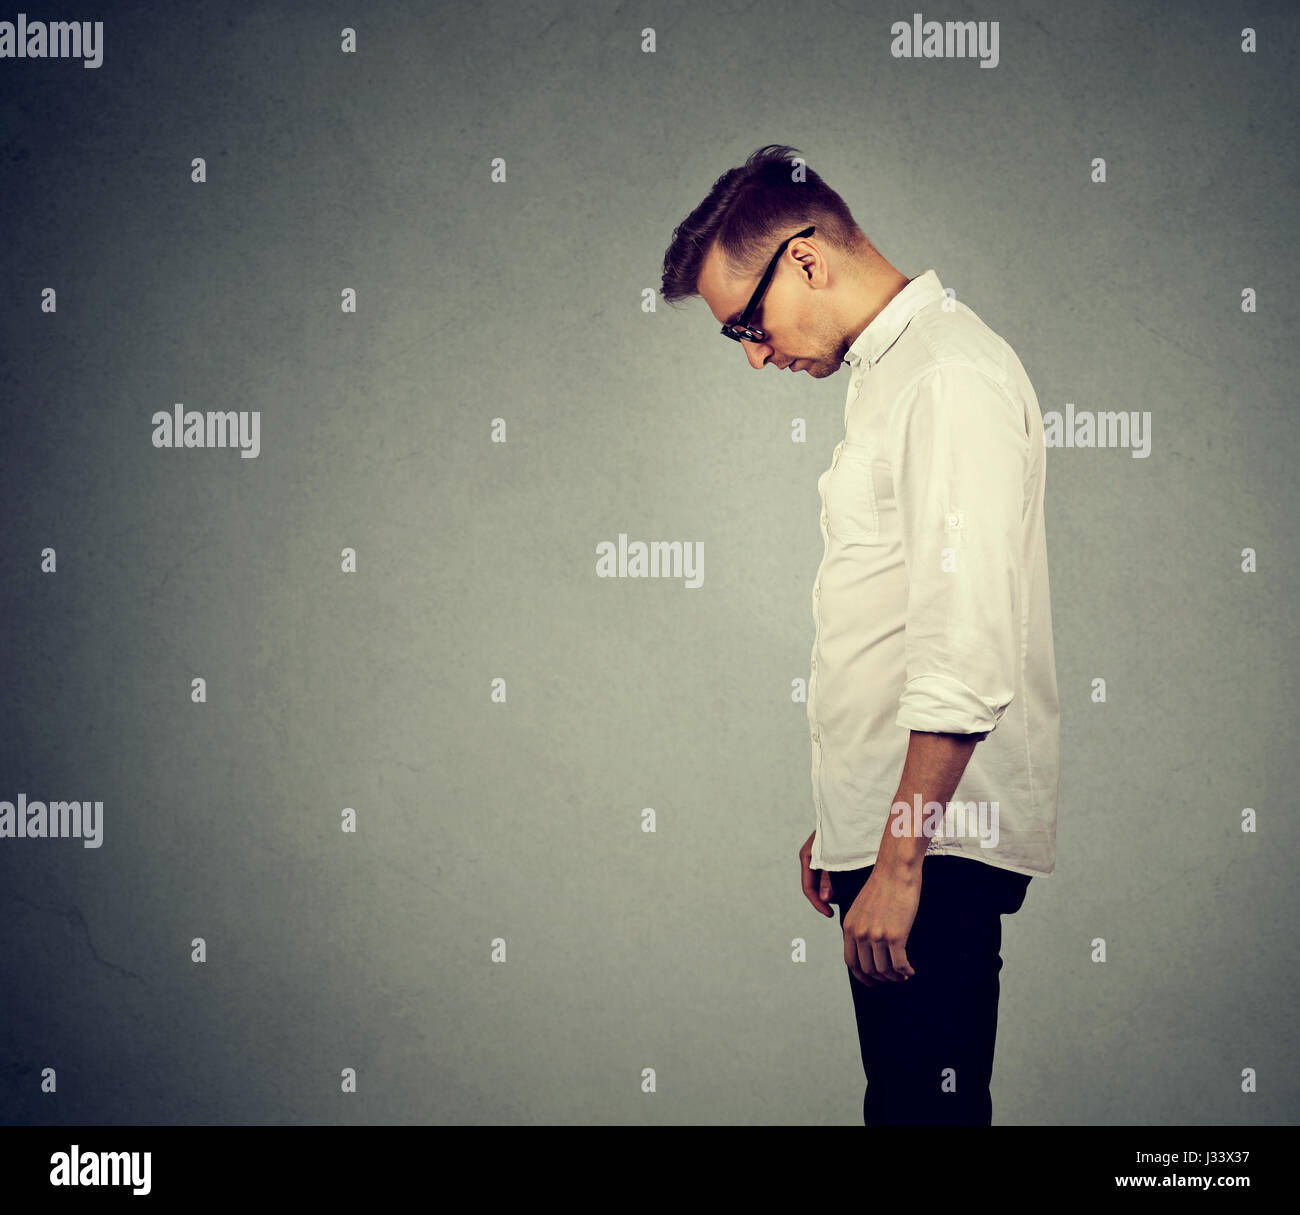 Side profile sad lonely young man looking down has no energy motivation in life depressed isolated on gray wall background Stock Photo